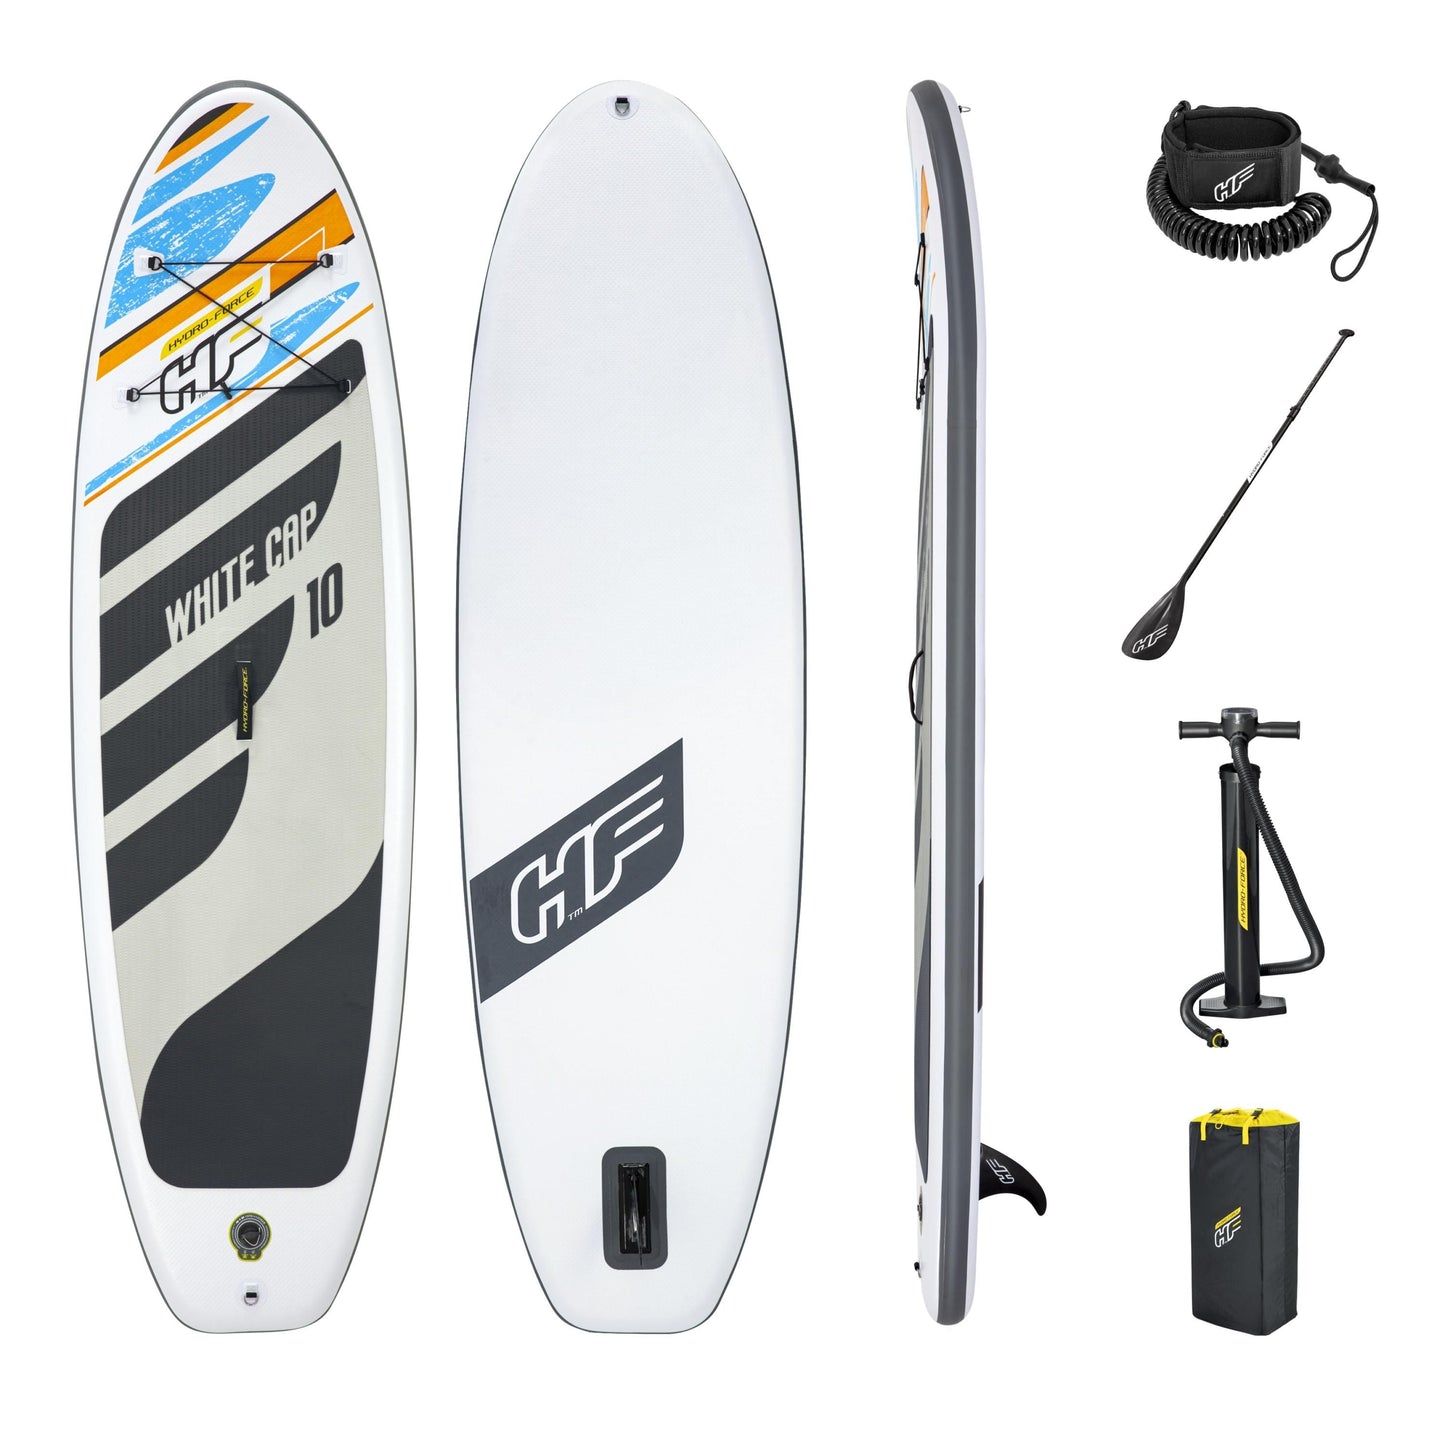 Bestway Hydro-Force White Cap 10ft aufblasbares SUP Stand Up Paddle Board im Test